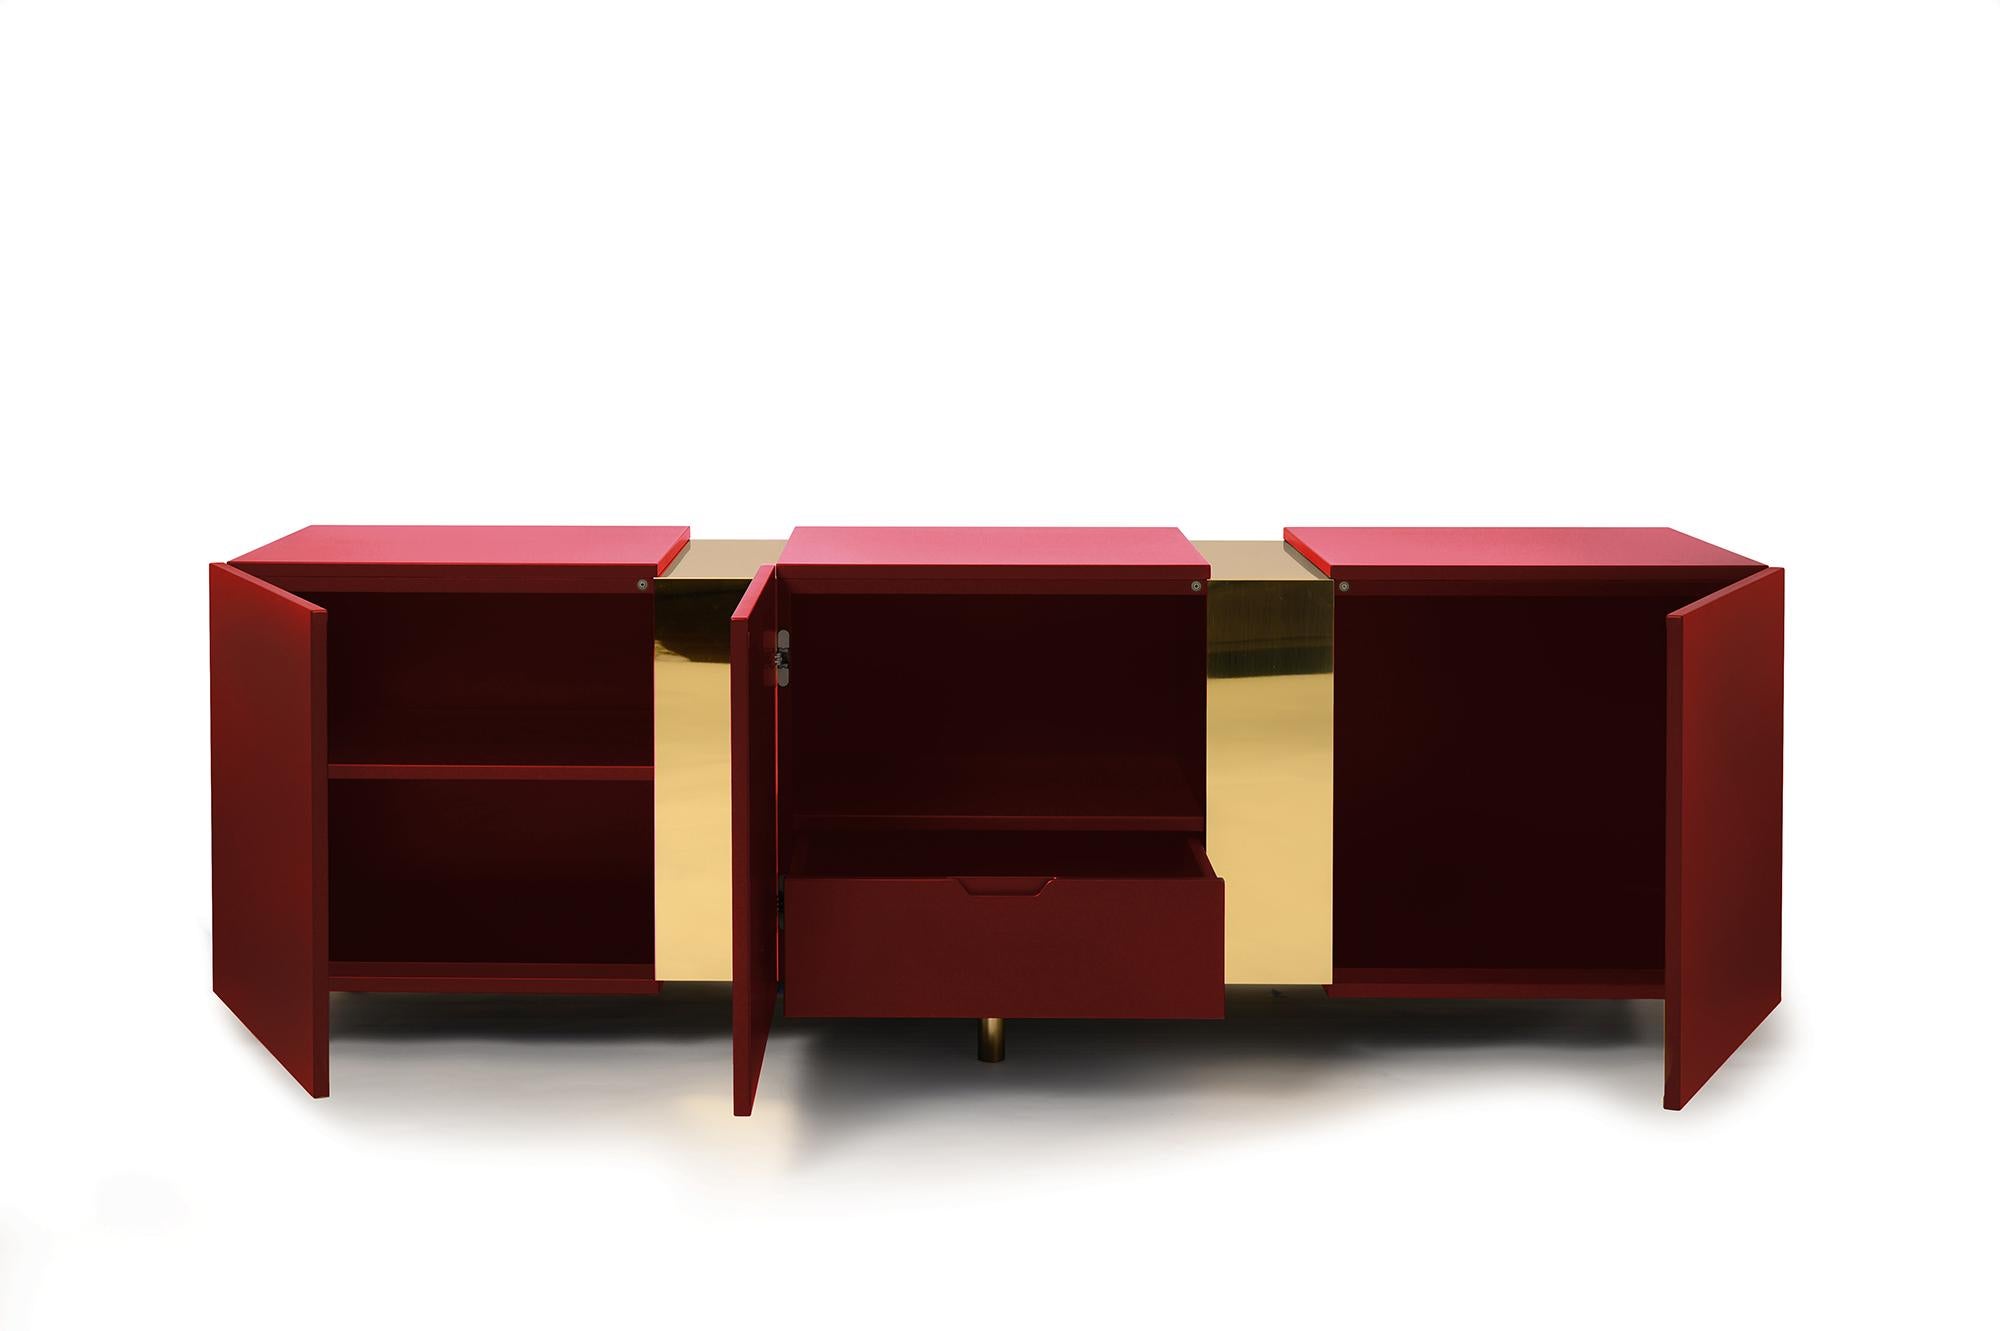 Eunduetrè is a low storage system which punctuates the space and plays with contrasting effects. Extremely simple in its geometric shapes, this sideboard/credenza alternates colorful cubes in matte lacquered wood, with sections of bent brass sheet